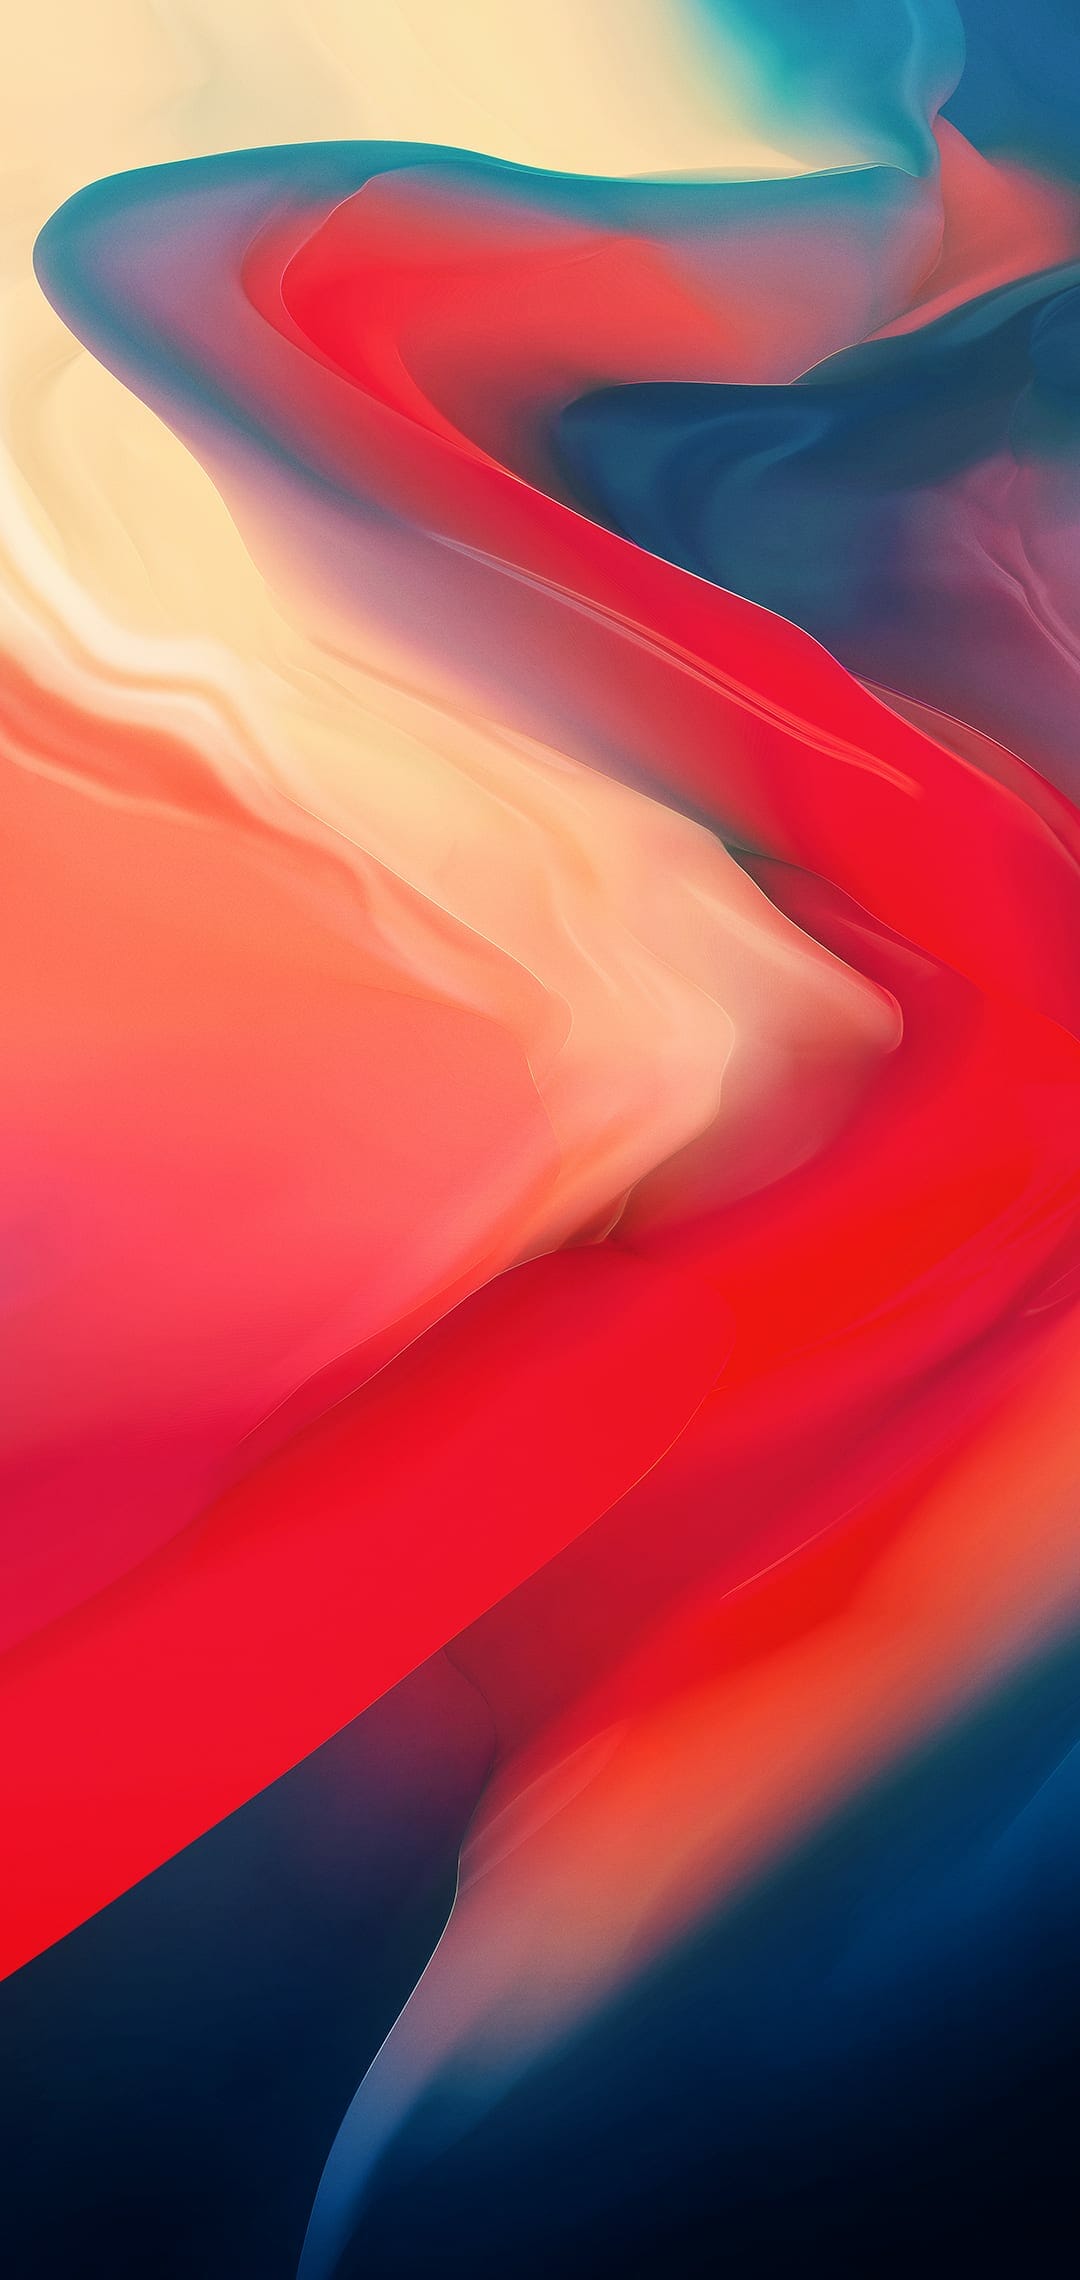 Download OnePlus 6 Stock Wallpapers 1080p/4K for your Phones